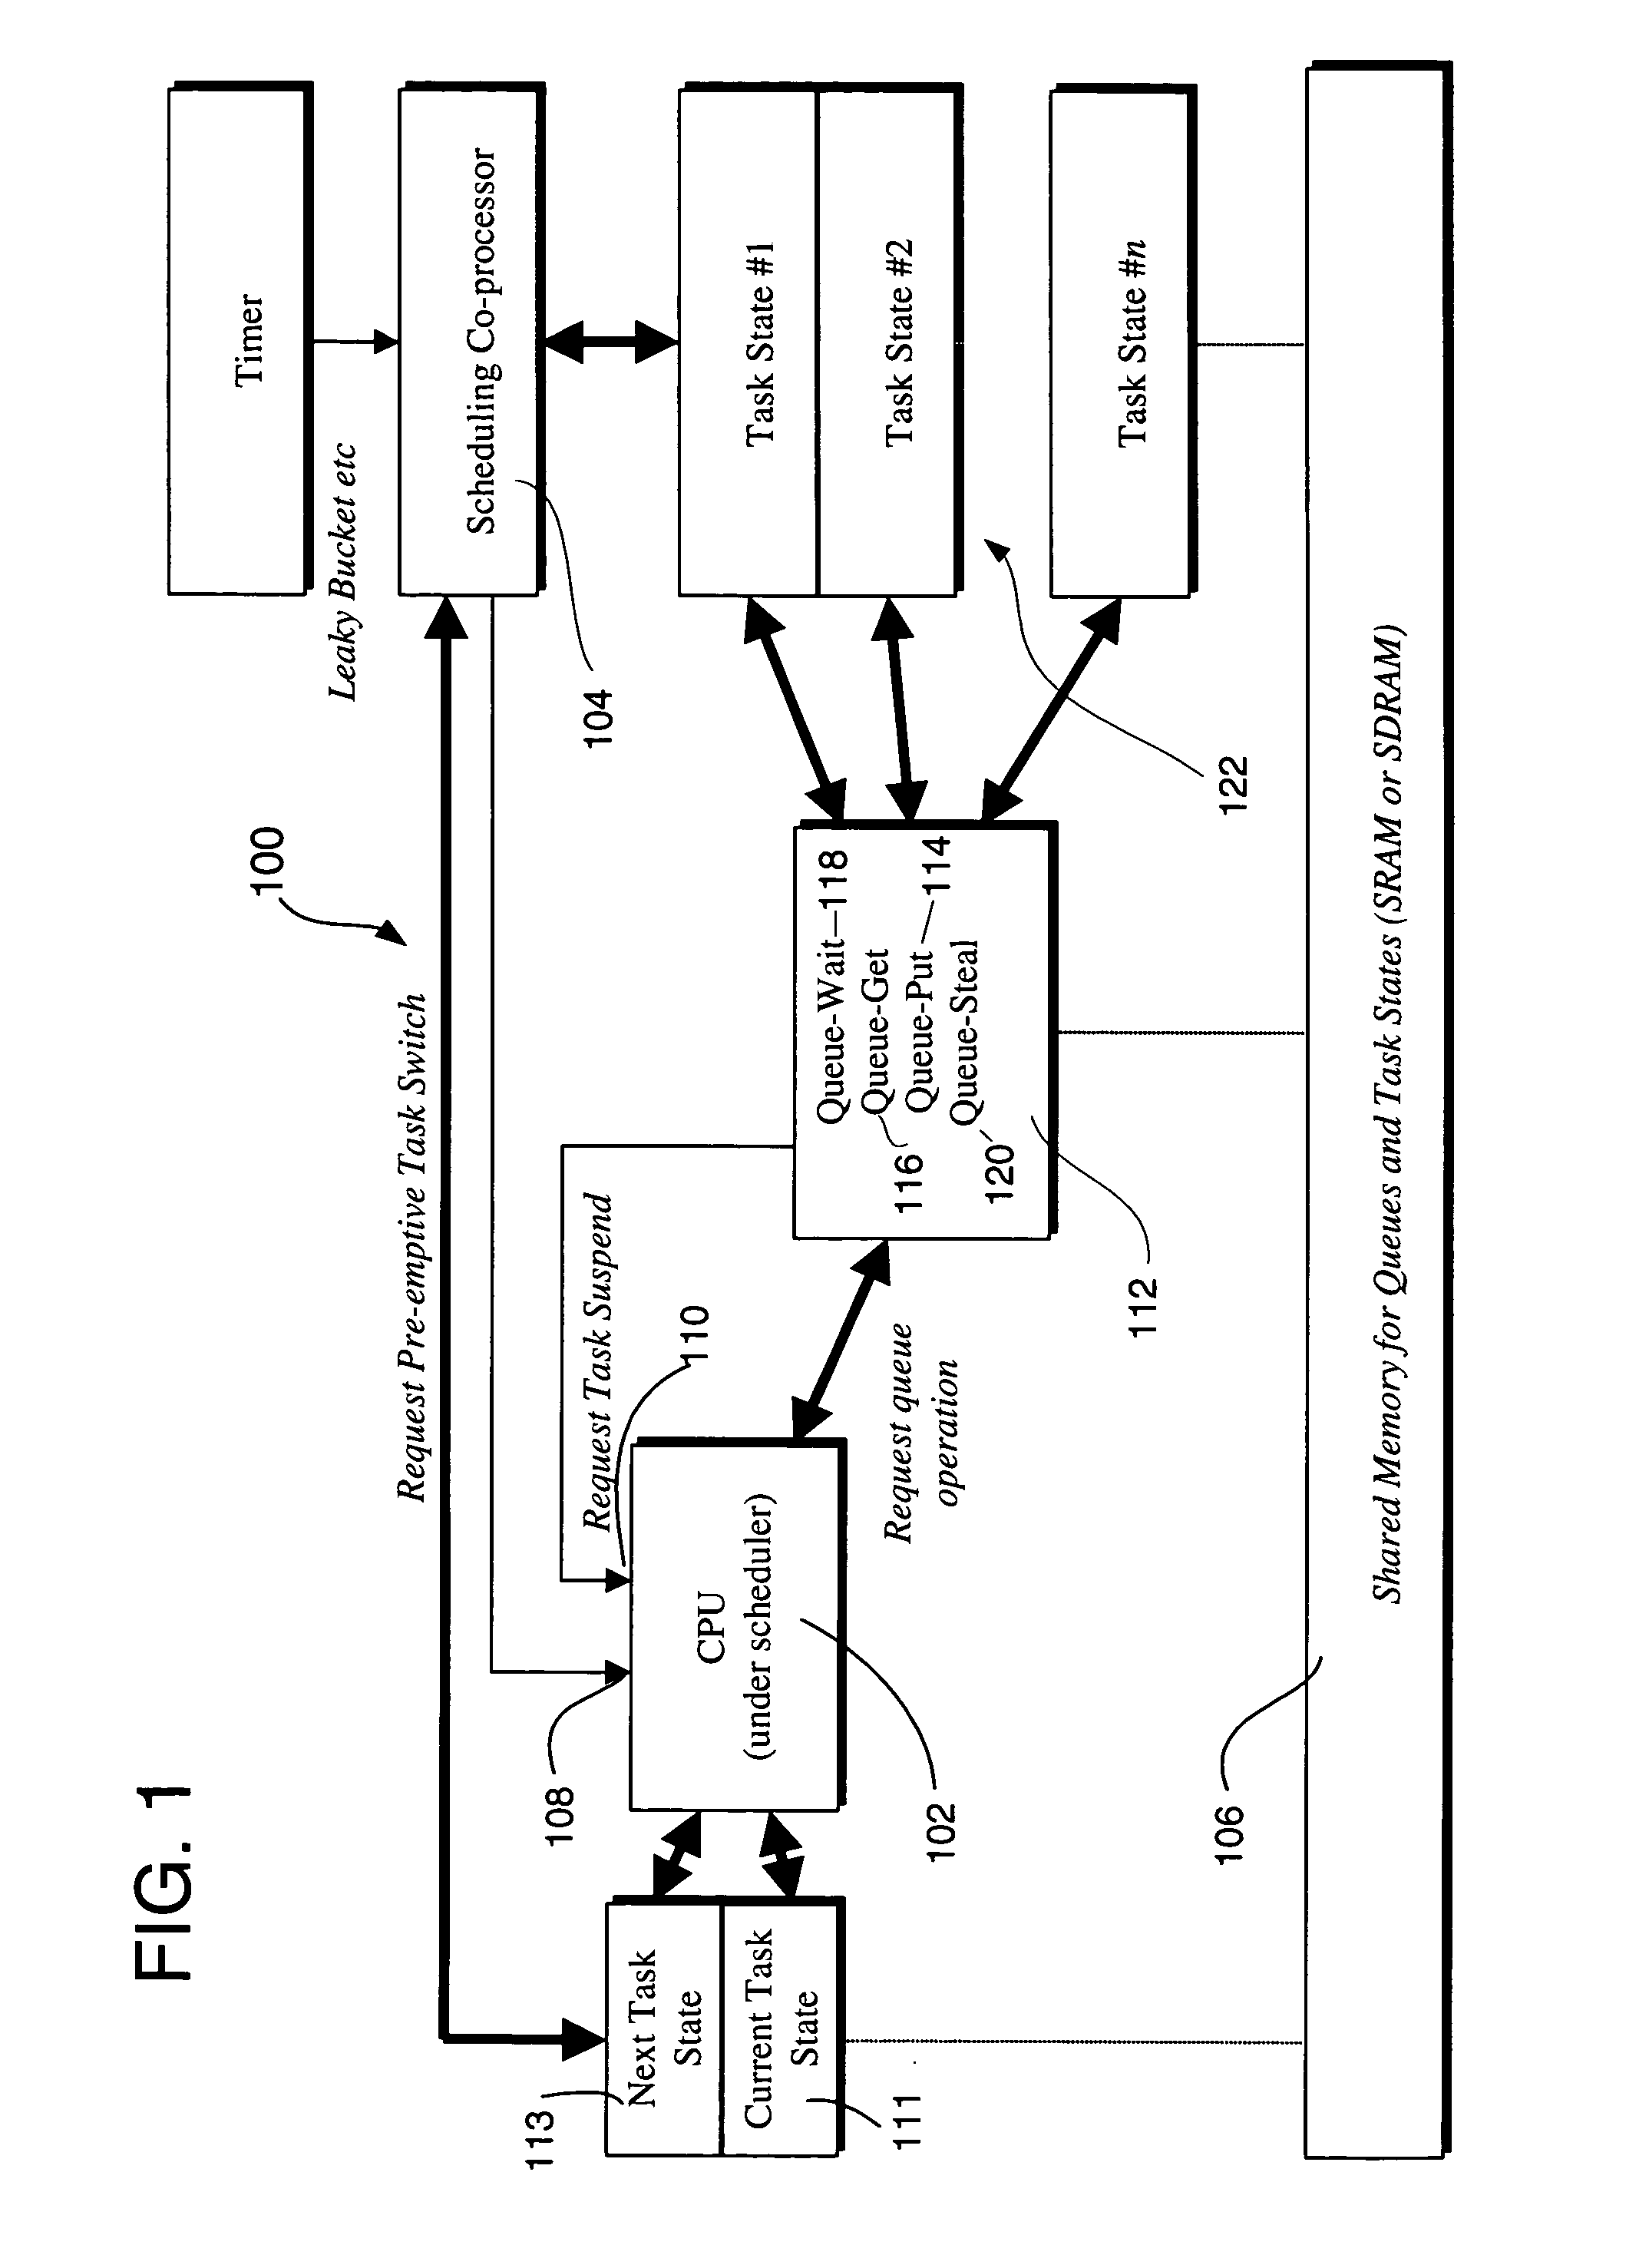 System and method for providing hardware-assisted task scheduling